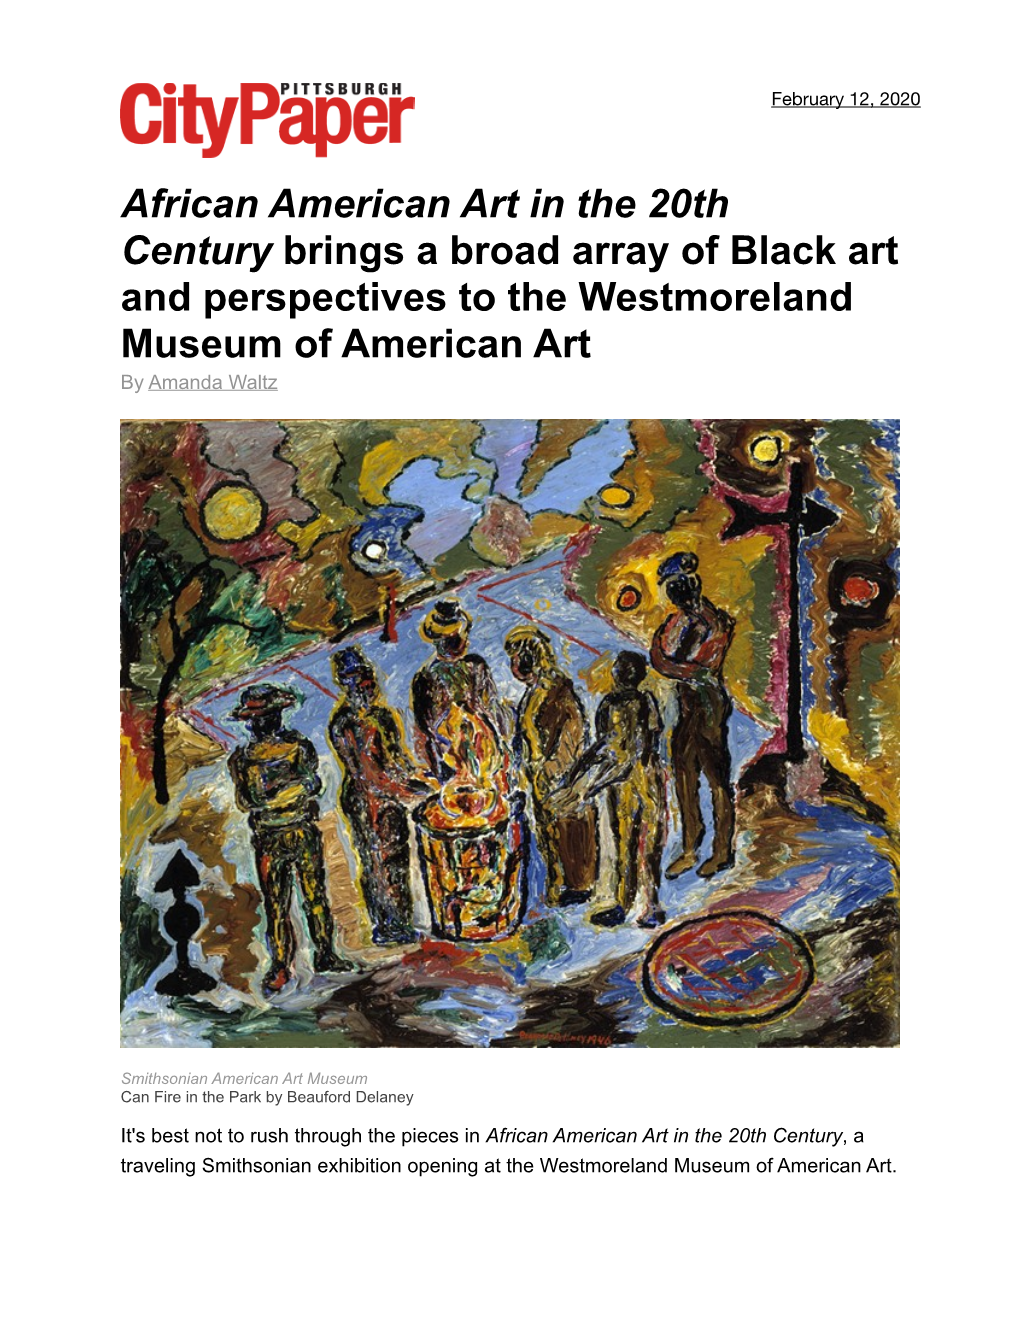 African American Art in the 20Th Century Brings a Broad Array of Black Art and Perspectives to the Westmoreland Museum of American Art by Amanda Waltz